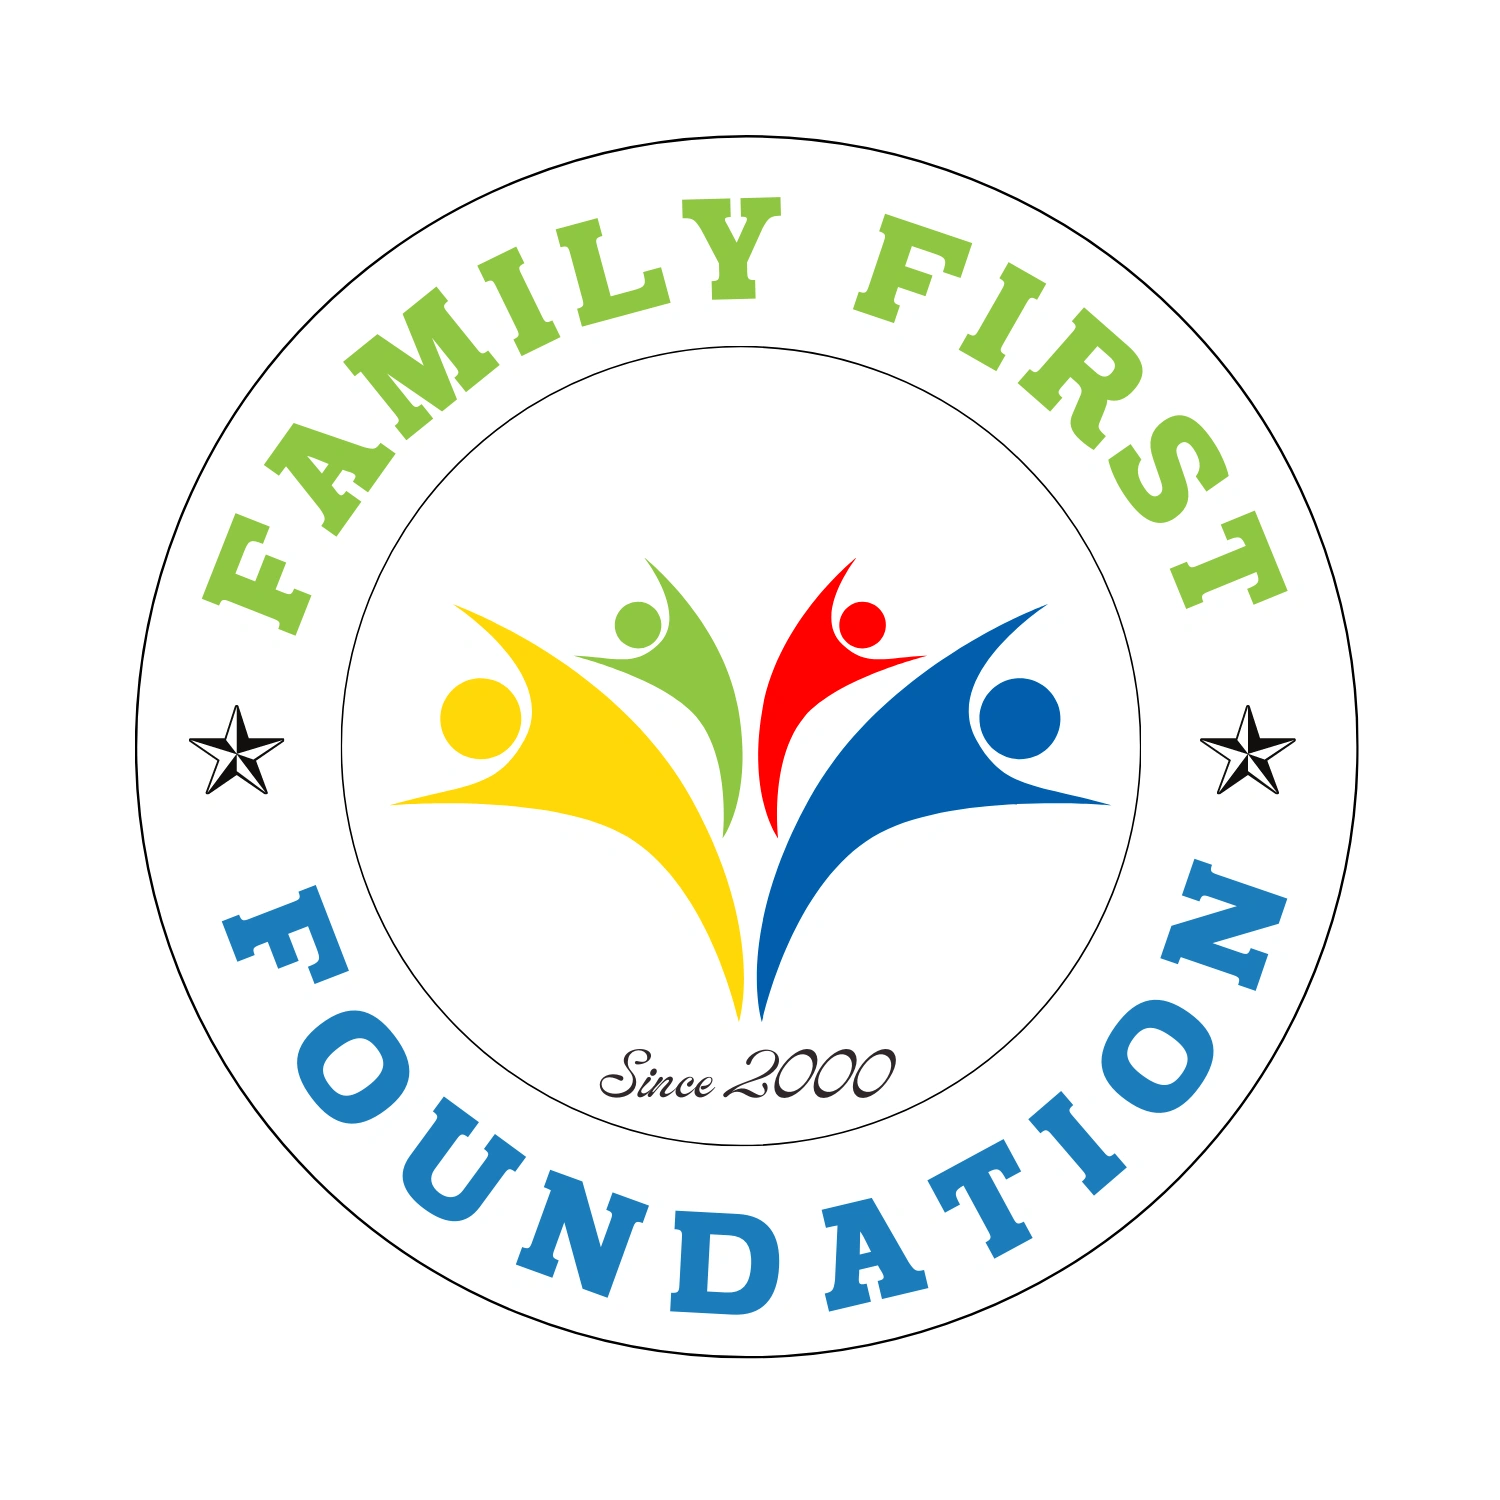 Family First Foundation - Three Programs, One Mission: City of Angels, L.A.  Future, Tech Hub, STEAM Education, Sports, Leadership, and Mentorship  Opportunity